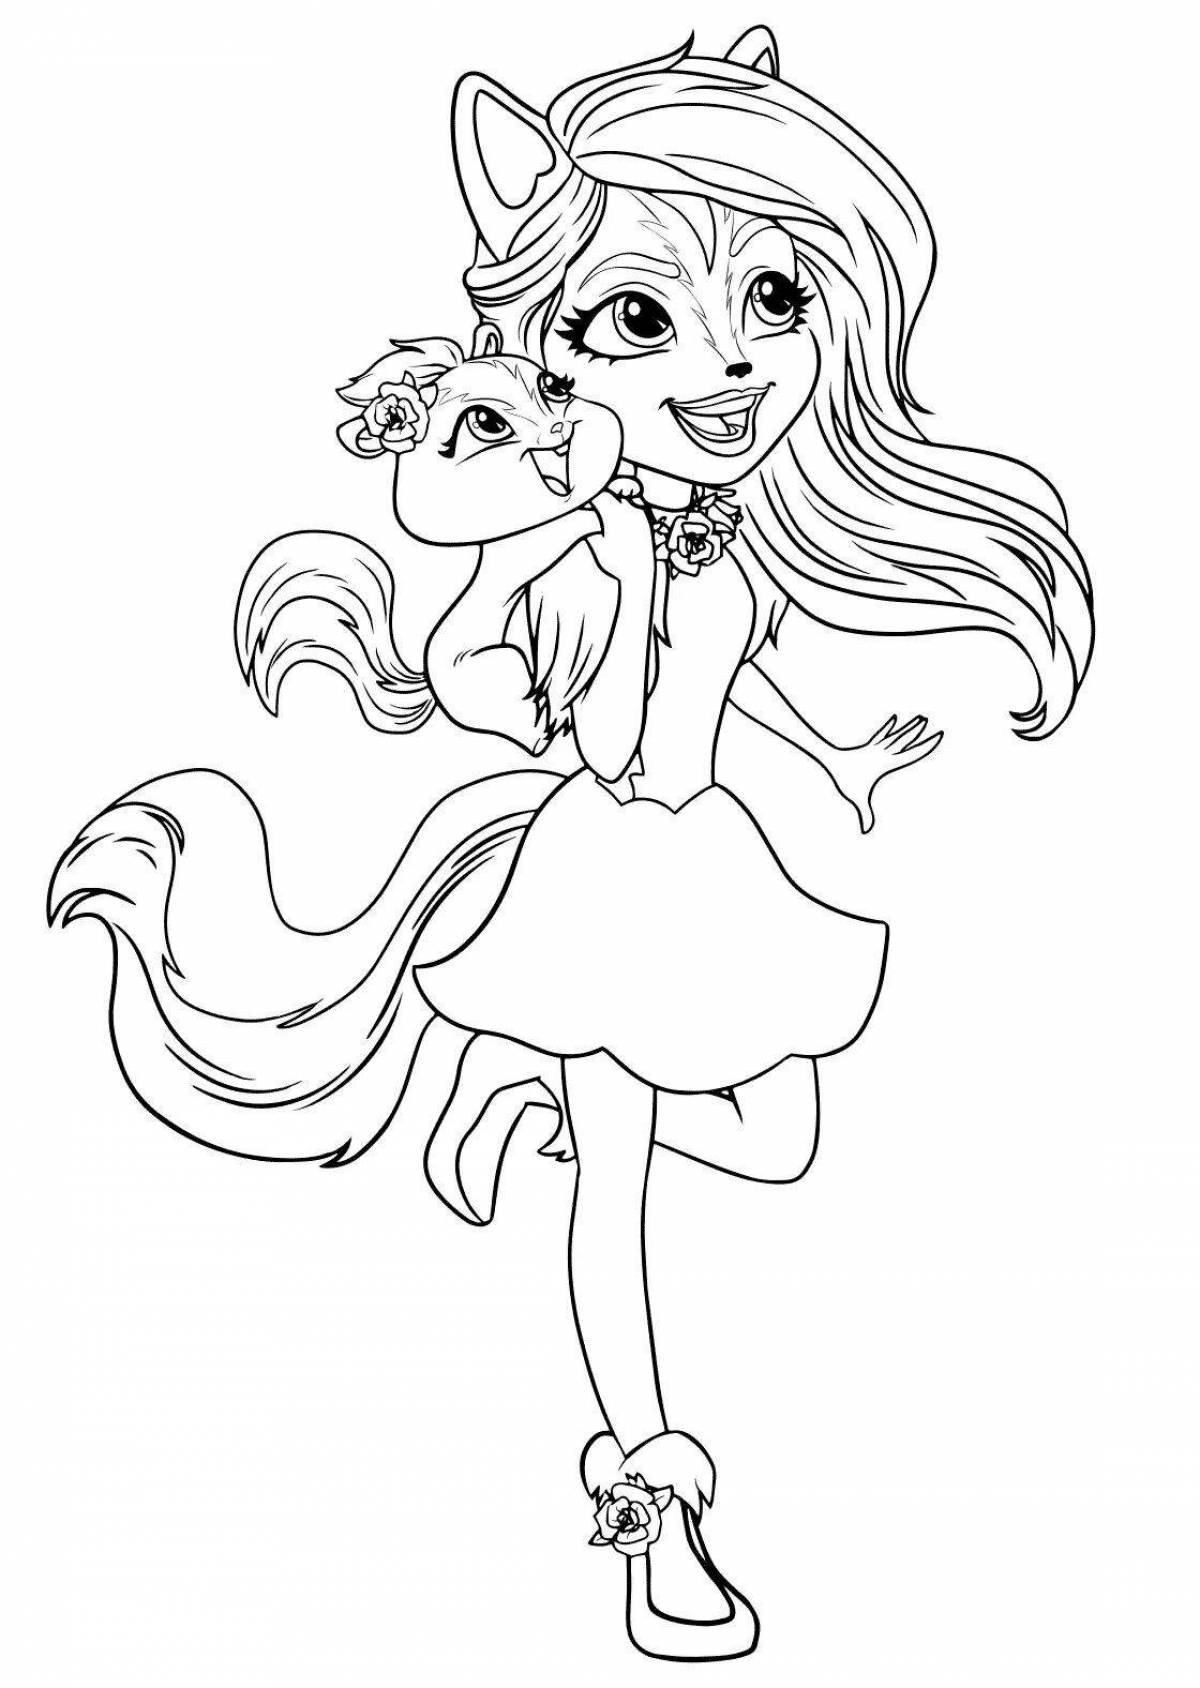 Radiant enchancimals coloring page